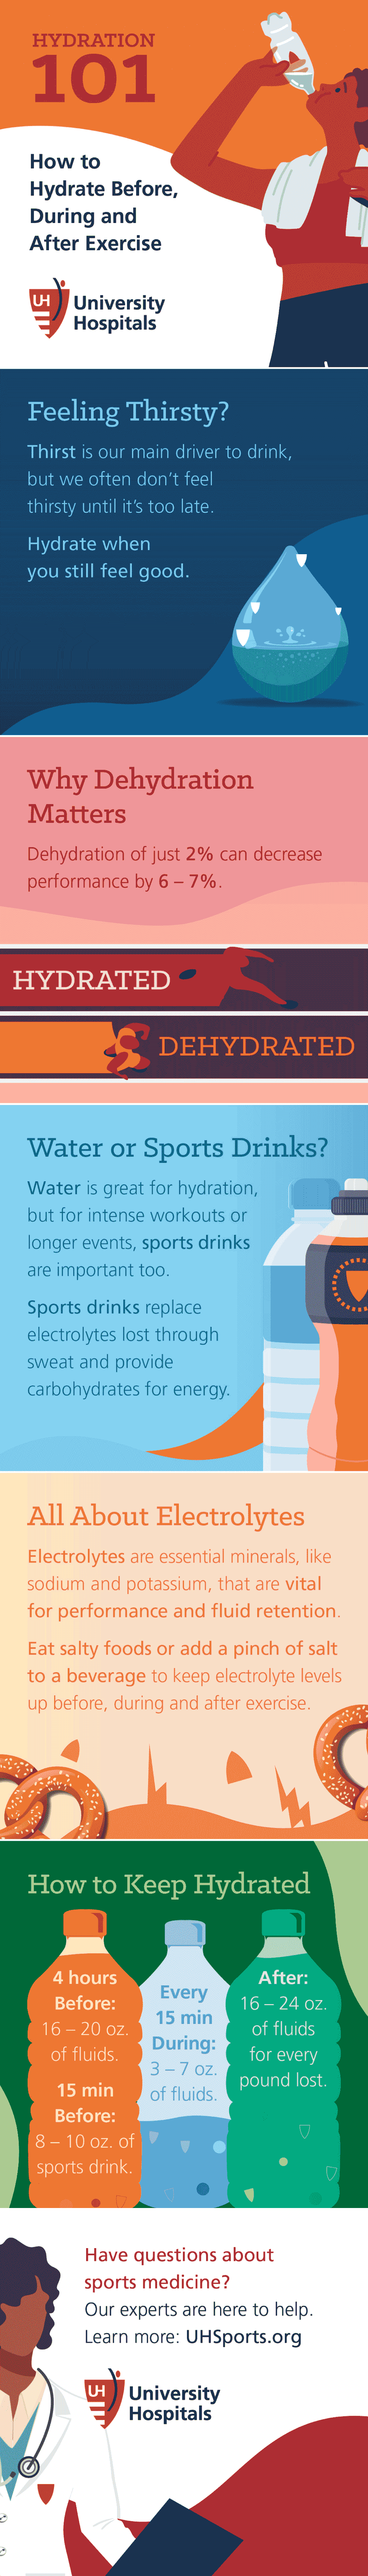 Infographic: How to Hydrate Before, During and After Exercise